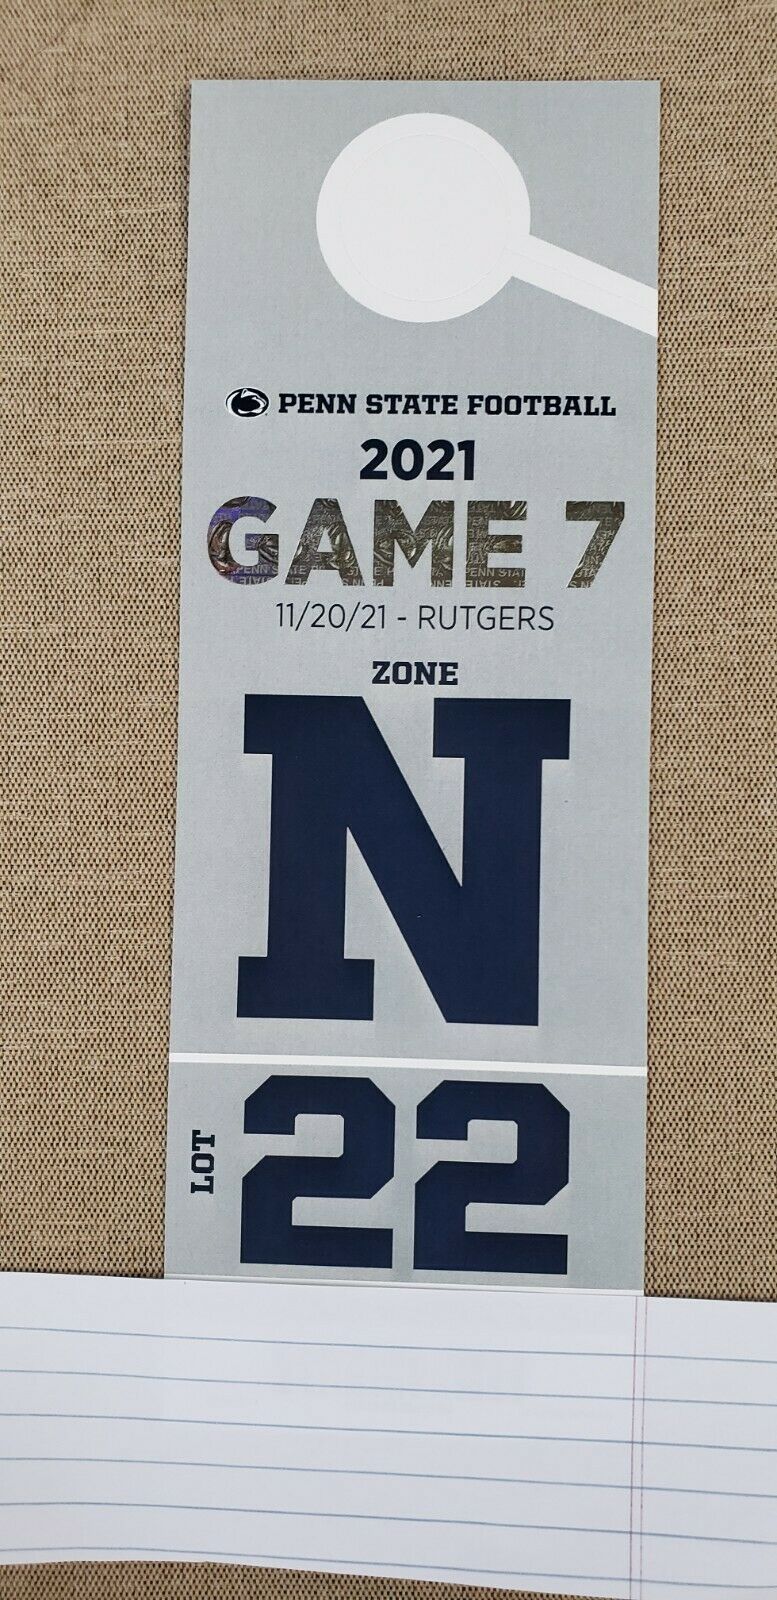 Psu Football Parking Pass For Rutgers Game On 11/20/21